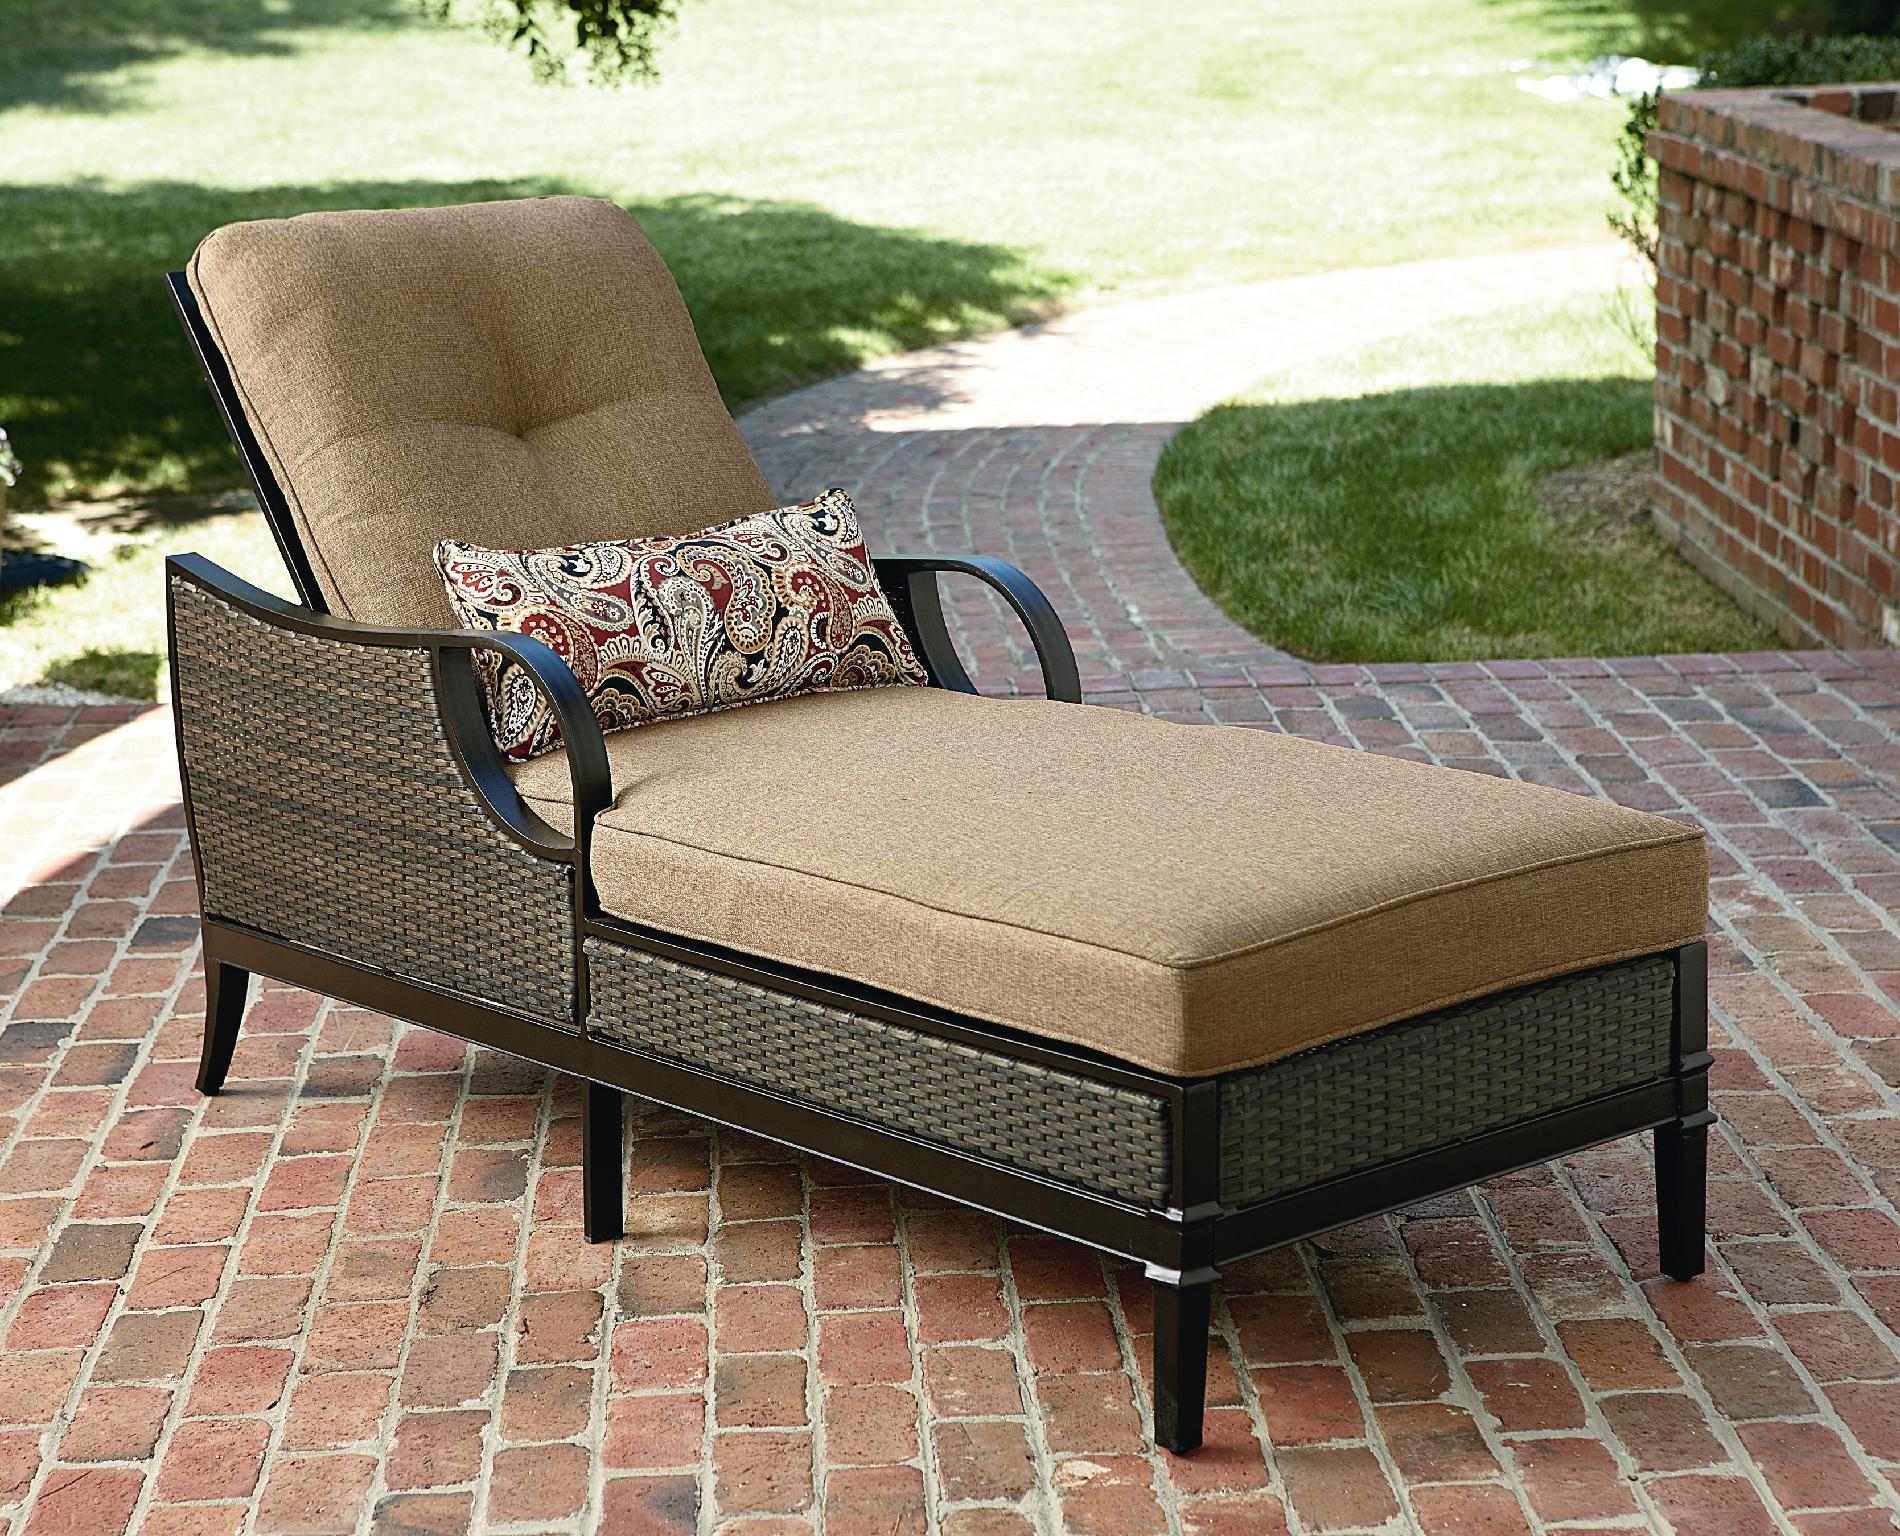 How to Choose a Comfy and Stylish Patio Chaise Lounge